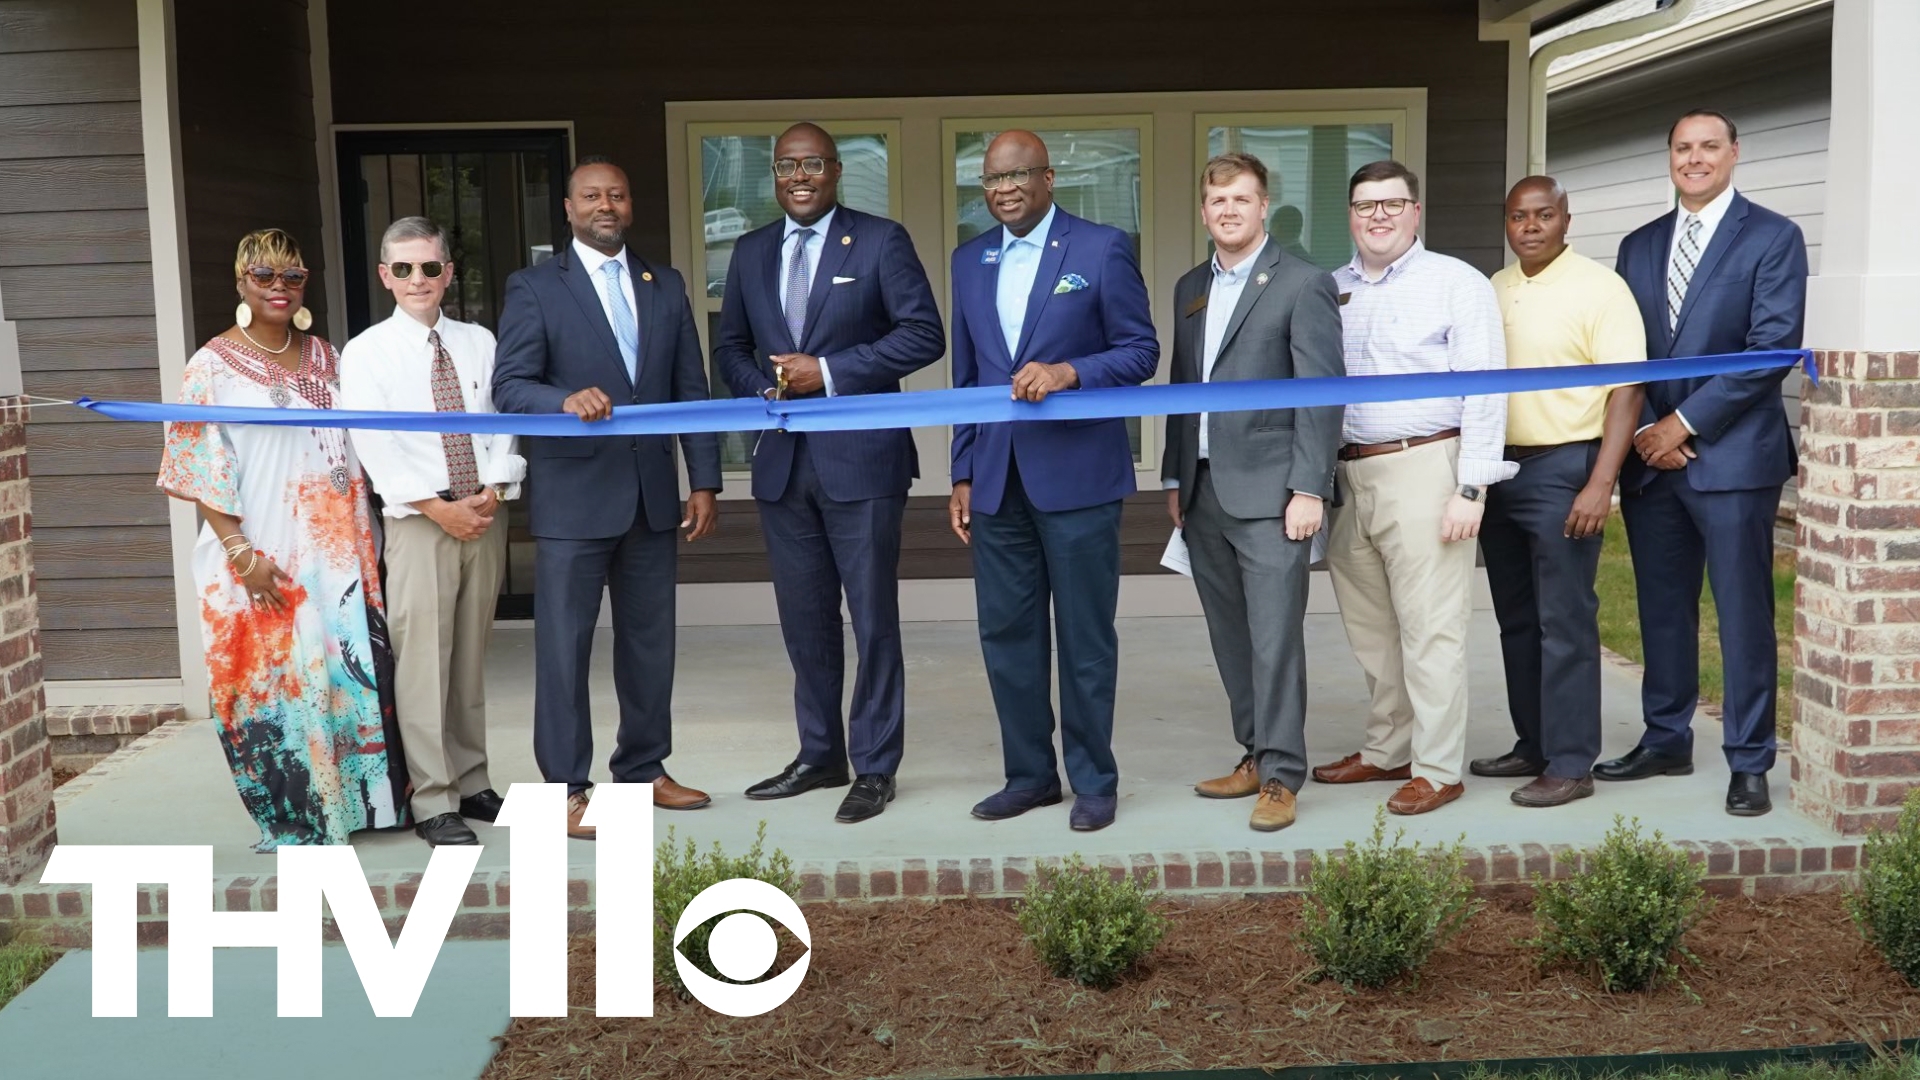 Little Rock Mayor Frank Scott Jr. says the city has surpassed expectations when they set out two years ago to build more affordable homes.